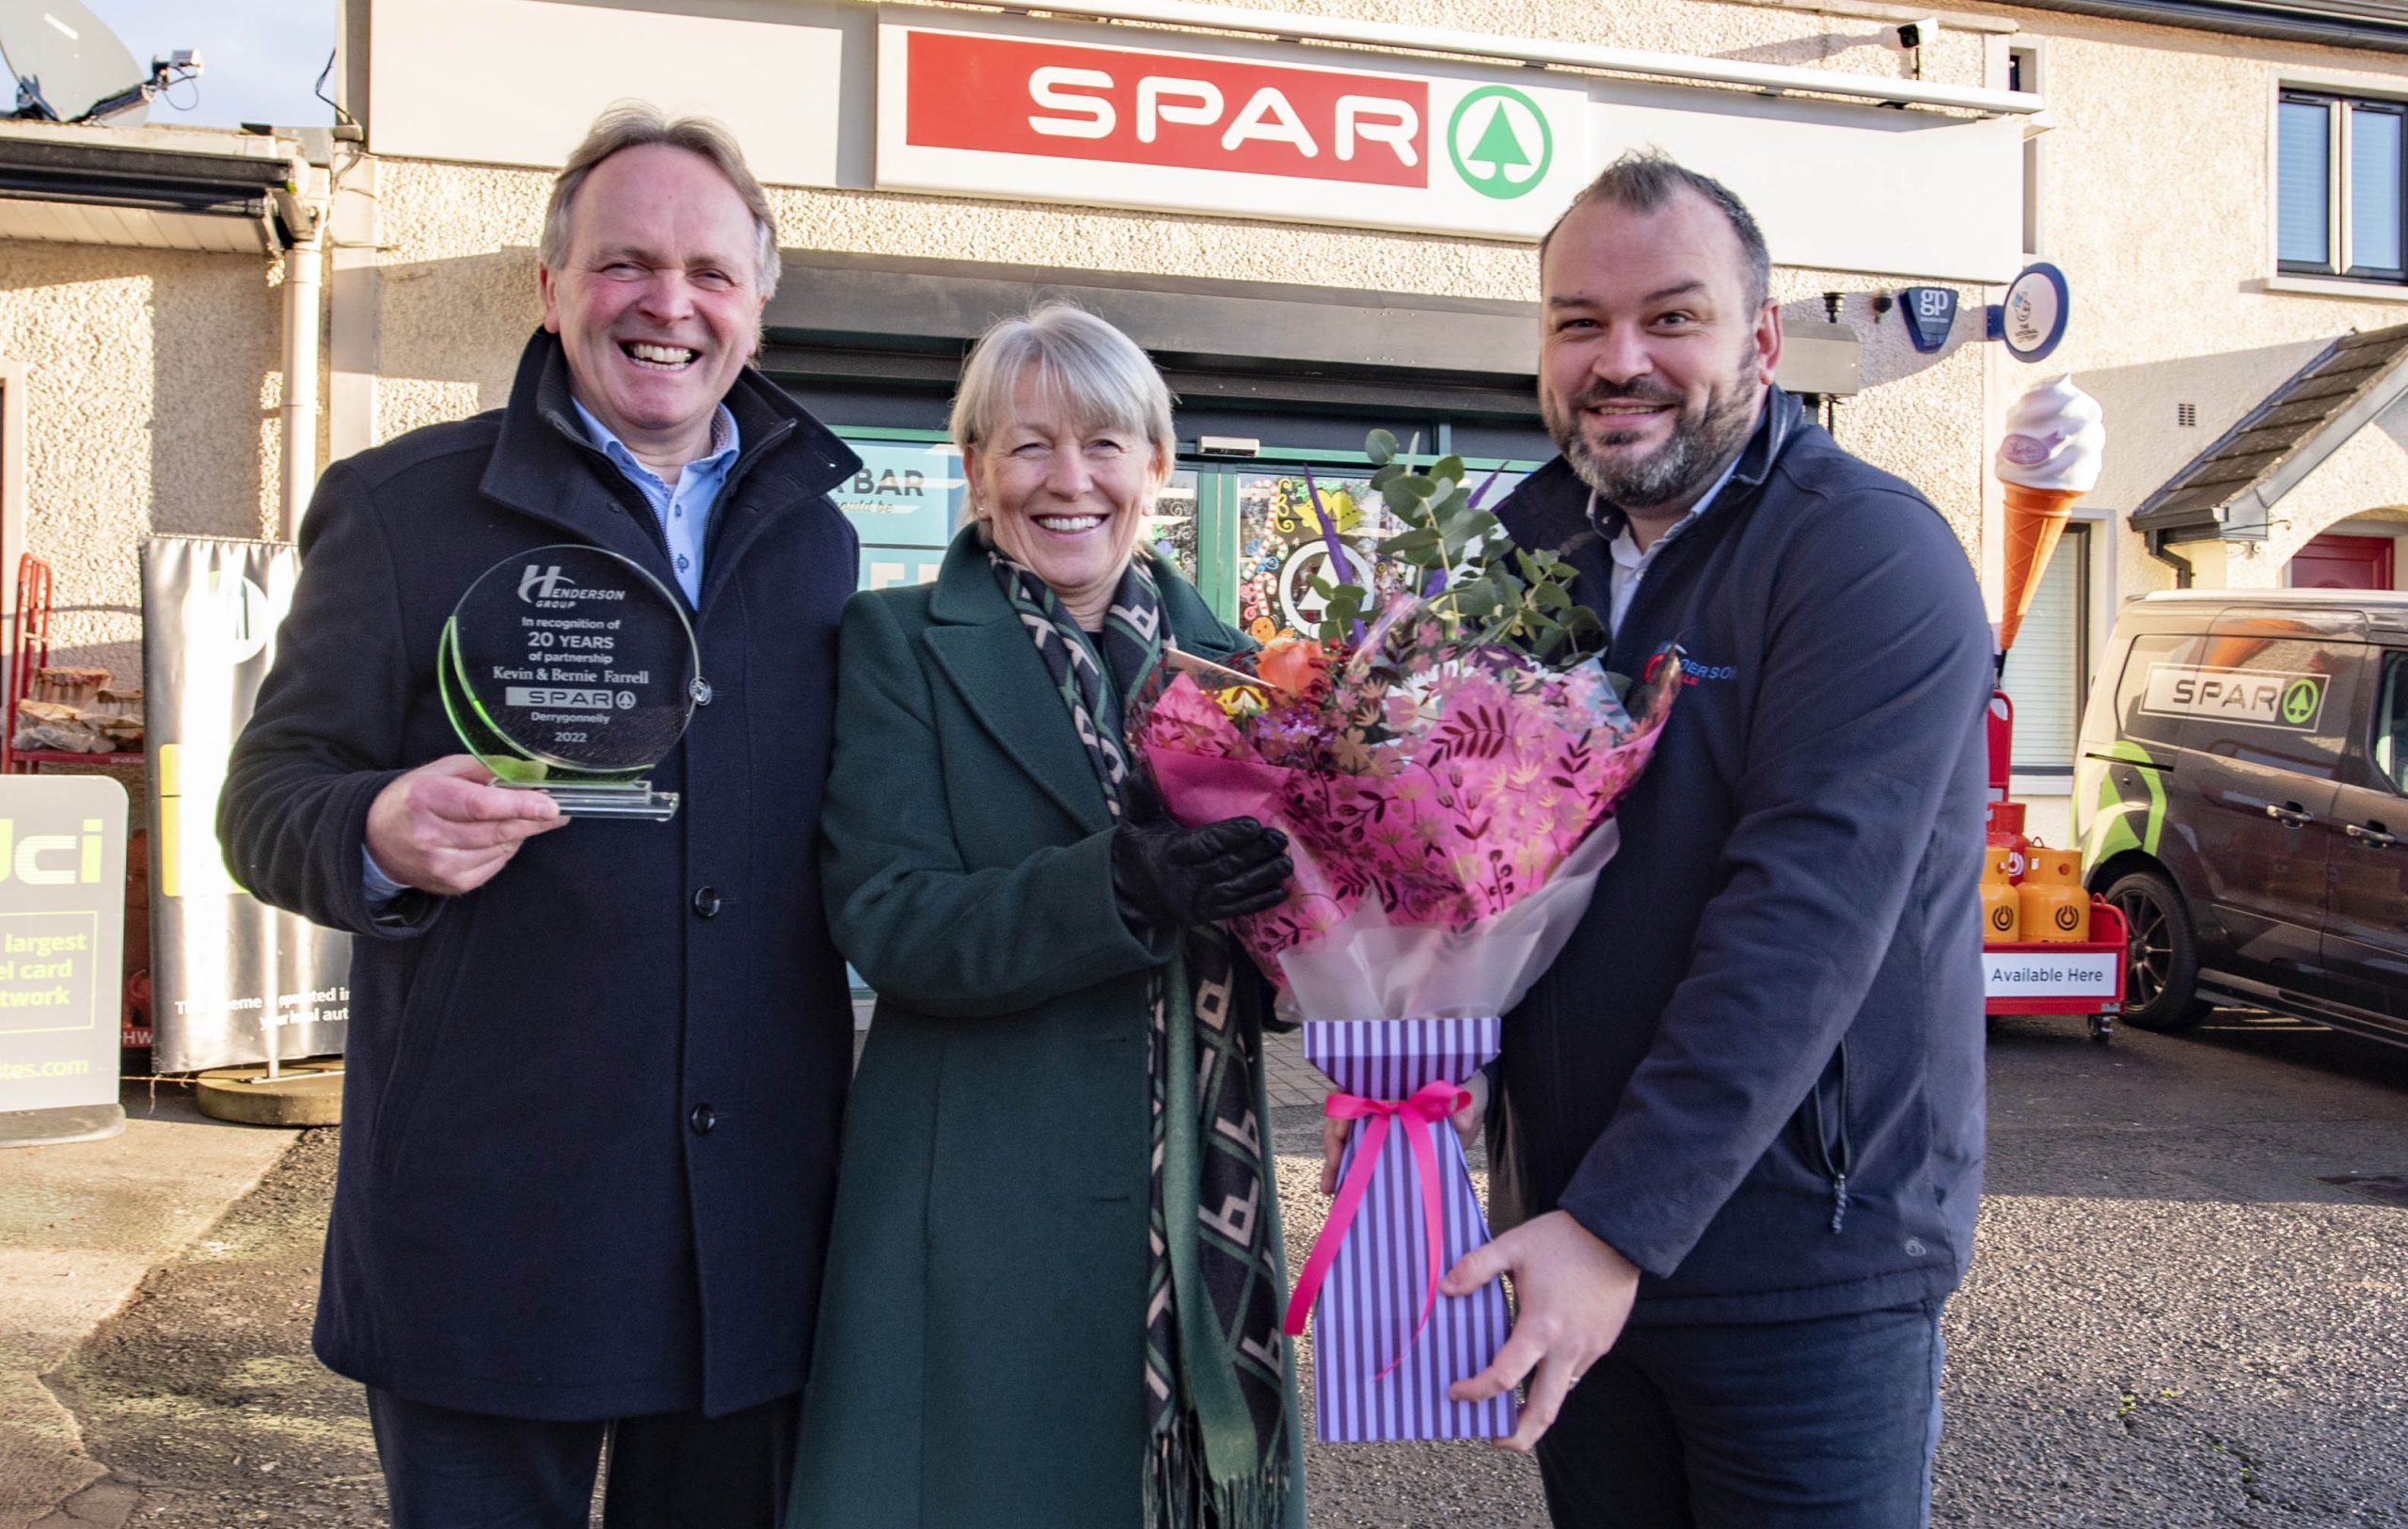 Fundraising event held as part of SPAR Derrygonnelly 20-year celebrations